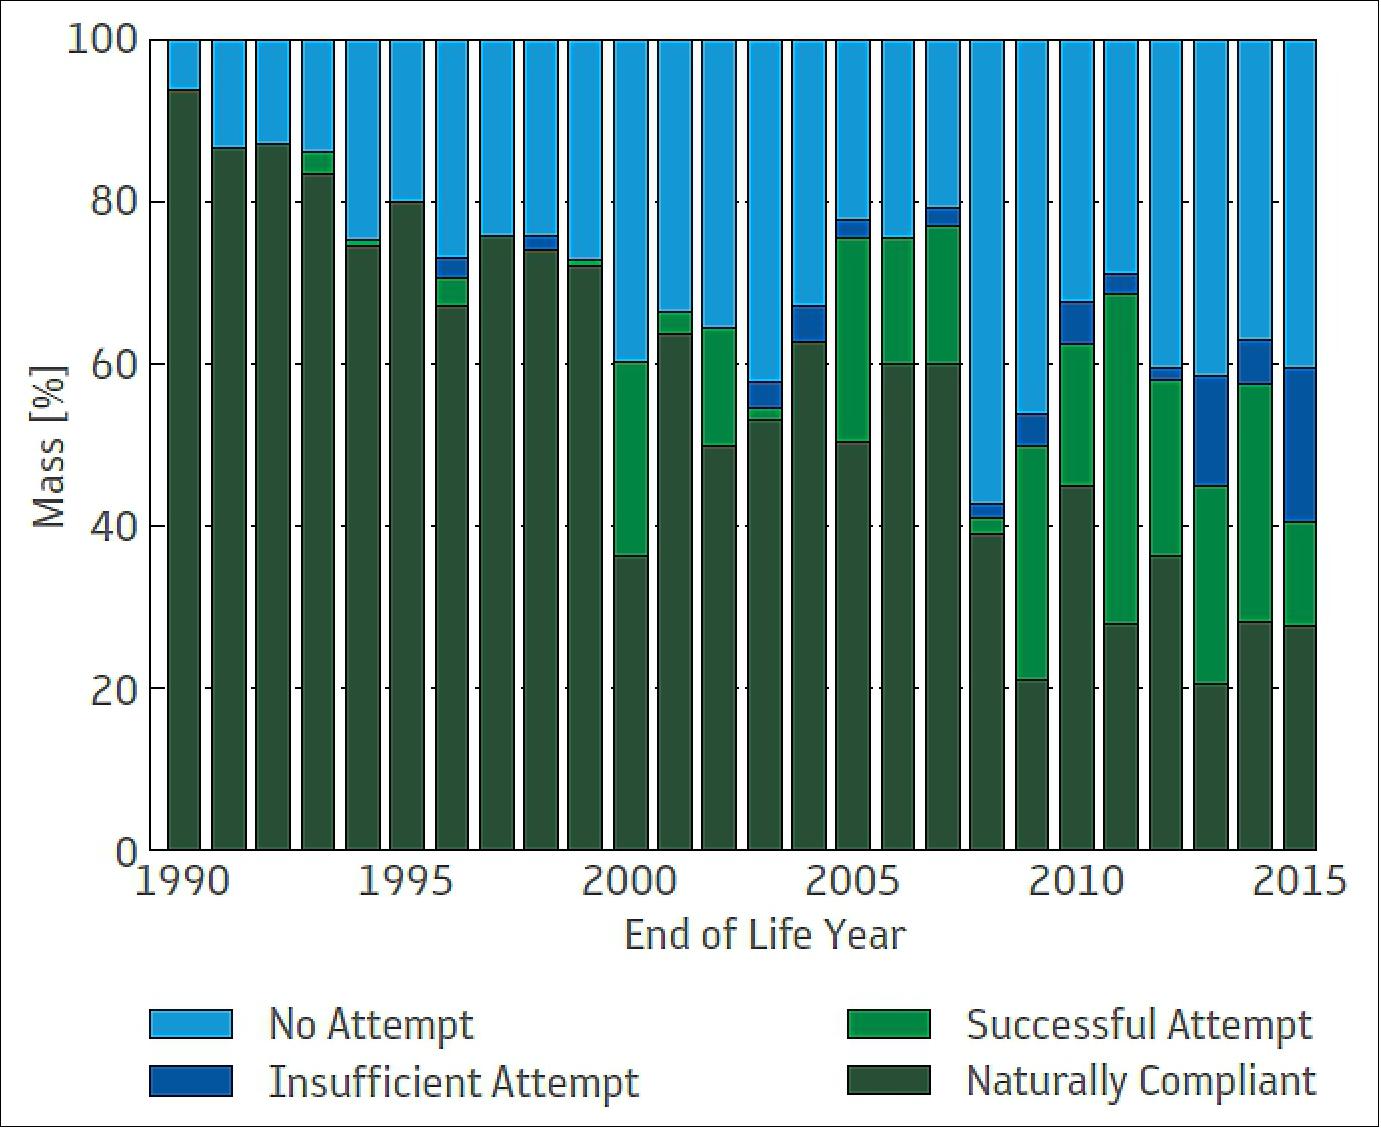 Figure 44: Estimates (by mass) of the adherence of space missions in LEO to post-mission disposal guidelines at end of life (image credit: ESA)